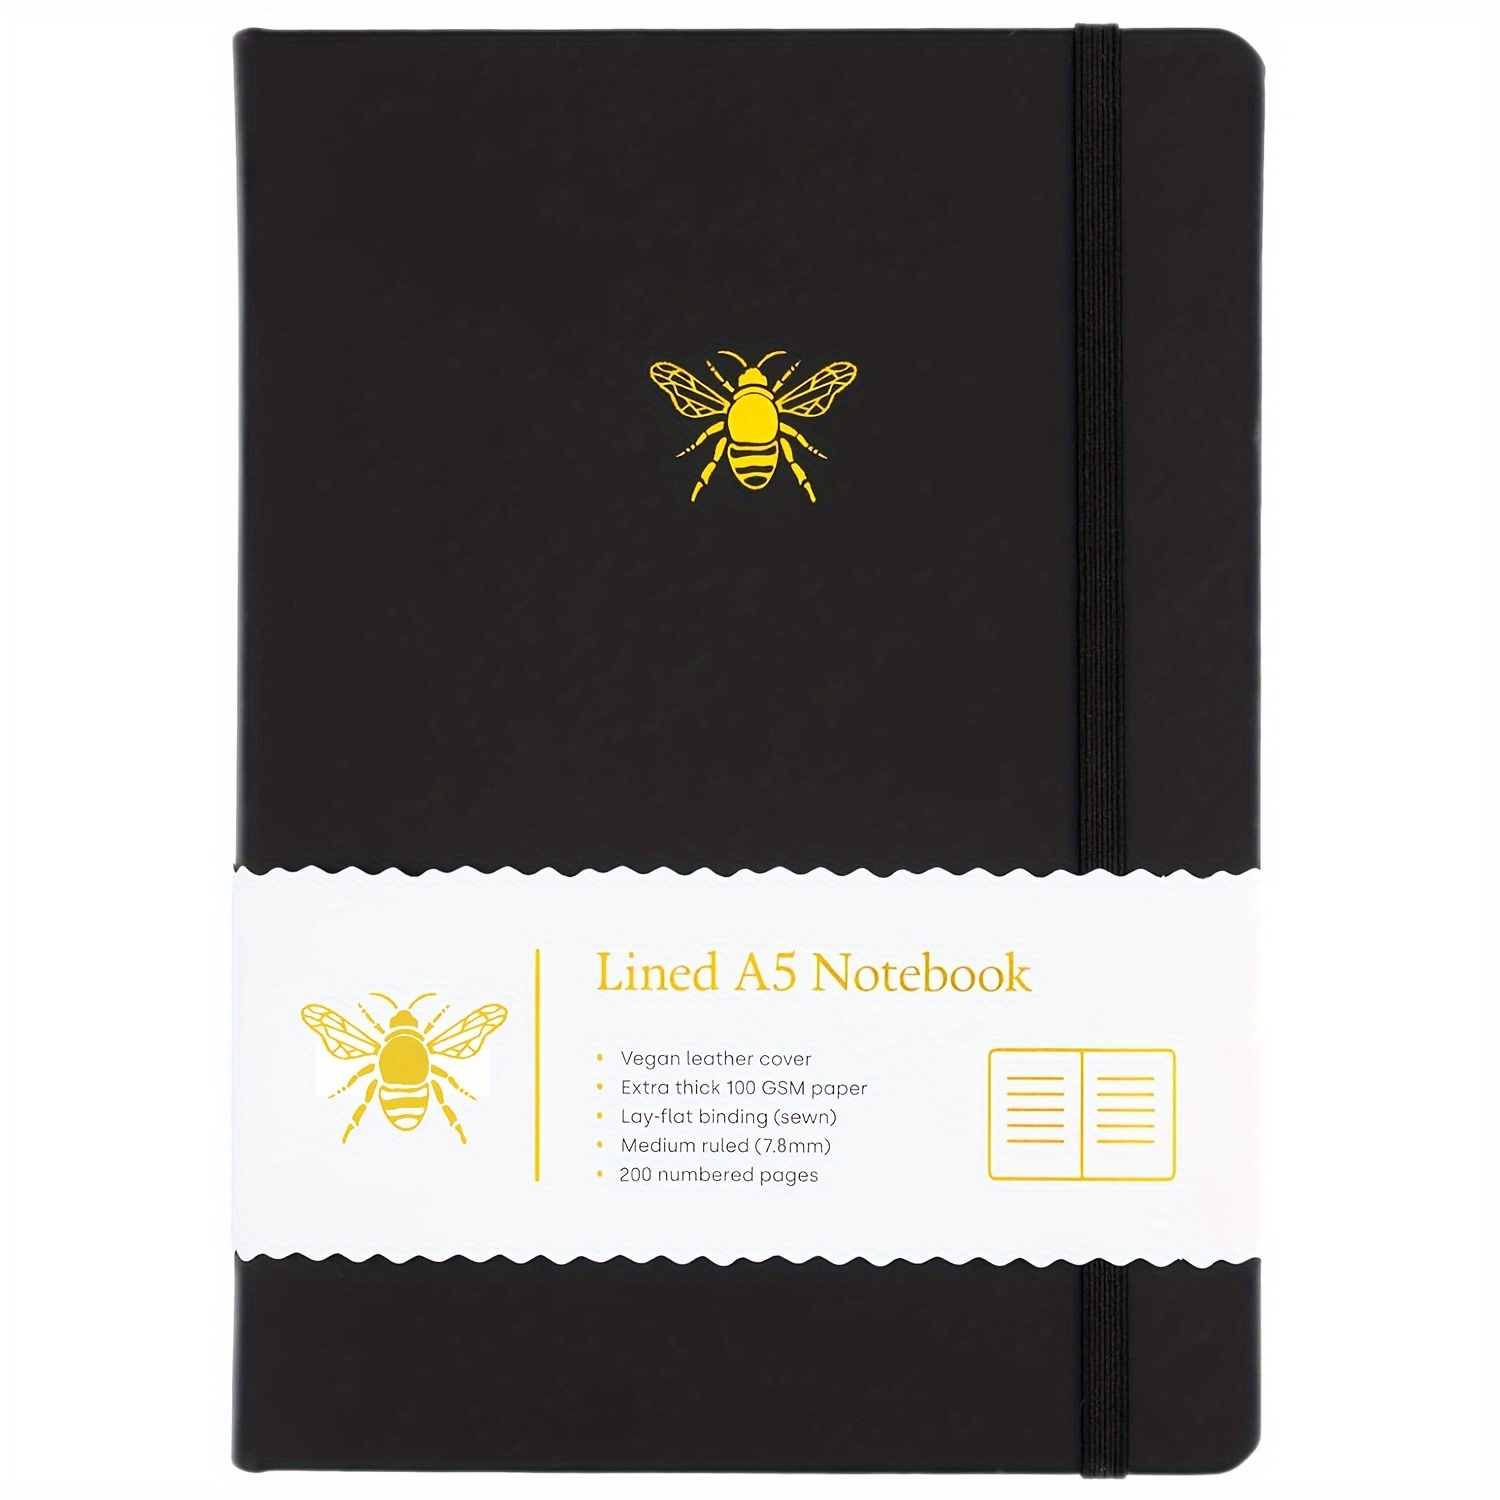 

A5 Hardcover Executive Notebook With Vegan Leather Cover And Bee Emblem - 200 Pages, Medium Ruled 14.5cm X 21.3cm, 100 Gsm Thick Paper - Plain Ruling Type